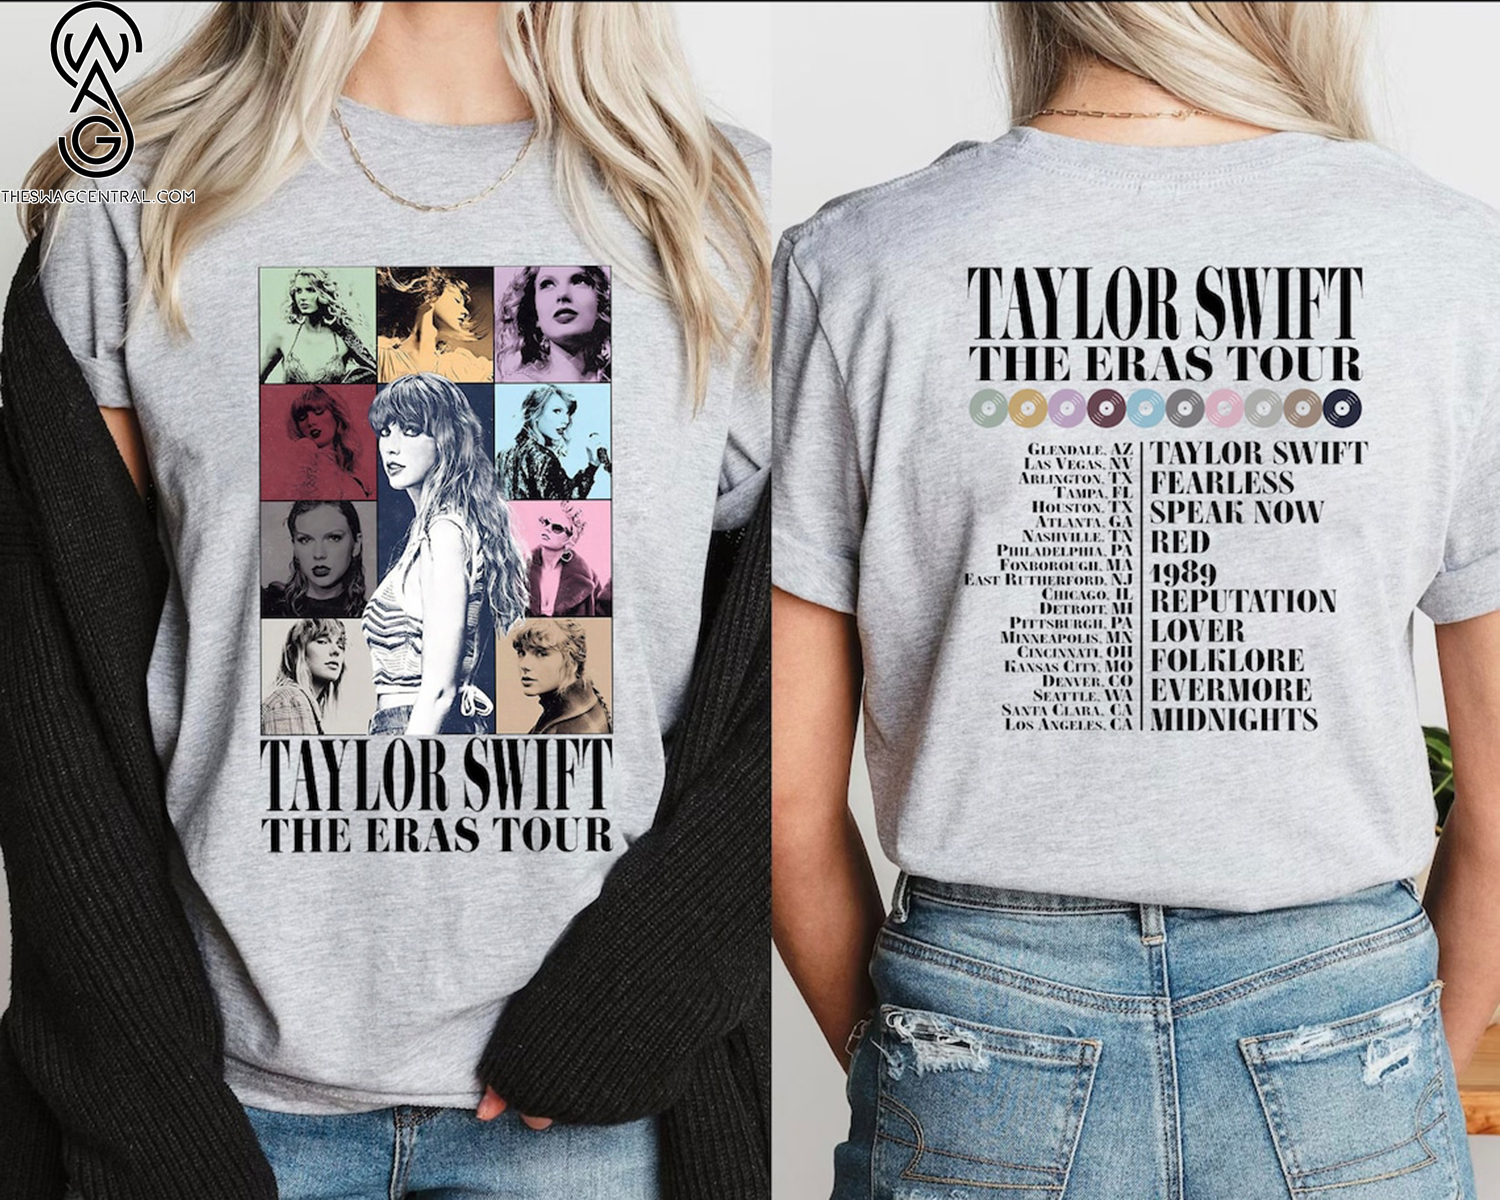 Era-Defining Spectacle The Eras Tour Concert and Taylor Swift Merch Near You